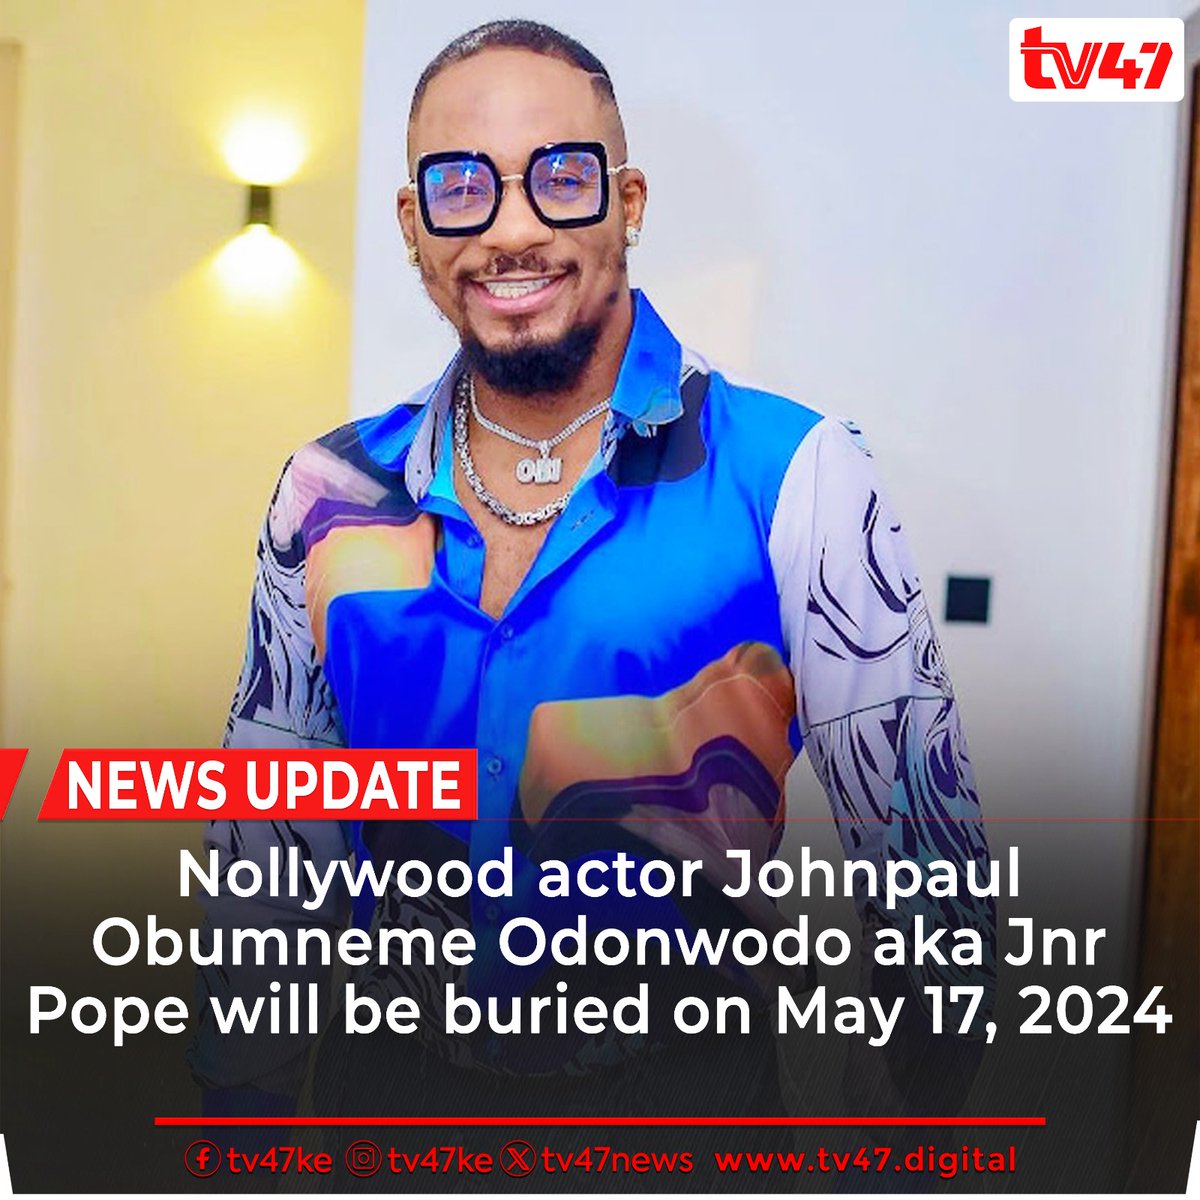 Nollywood actor Johnpaul Obumneme Odonwodo aka Jnr Pope will be buried on May 17, 2024.

The 43-year-old actor and four other actors drowned after their boat capsized in the Anam River in Anambra State on April 10 while returning from a movie shoot.

#TV47Entertainment #TV47News